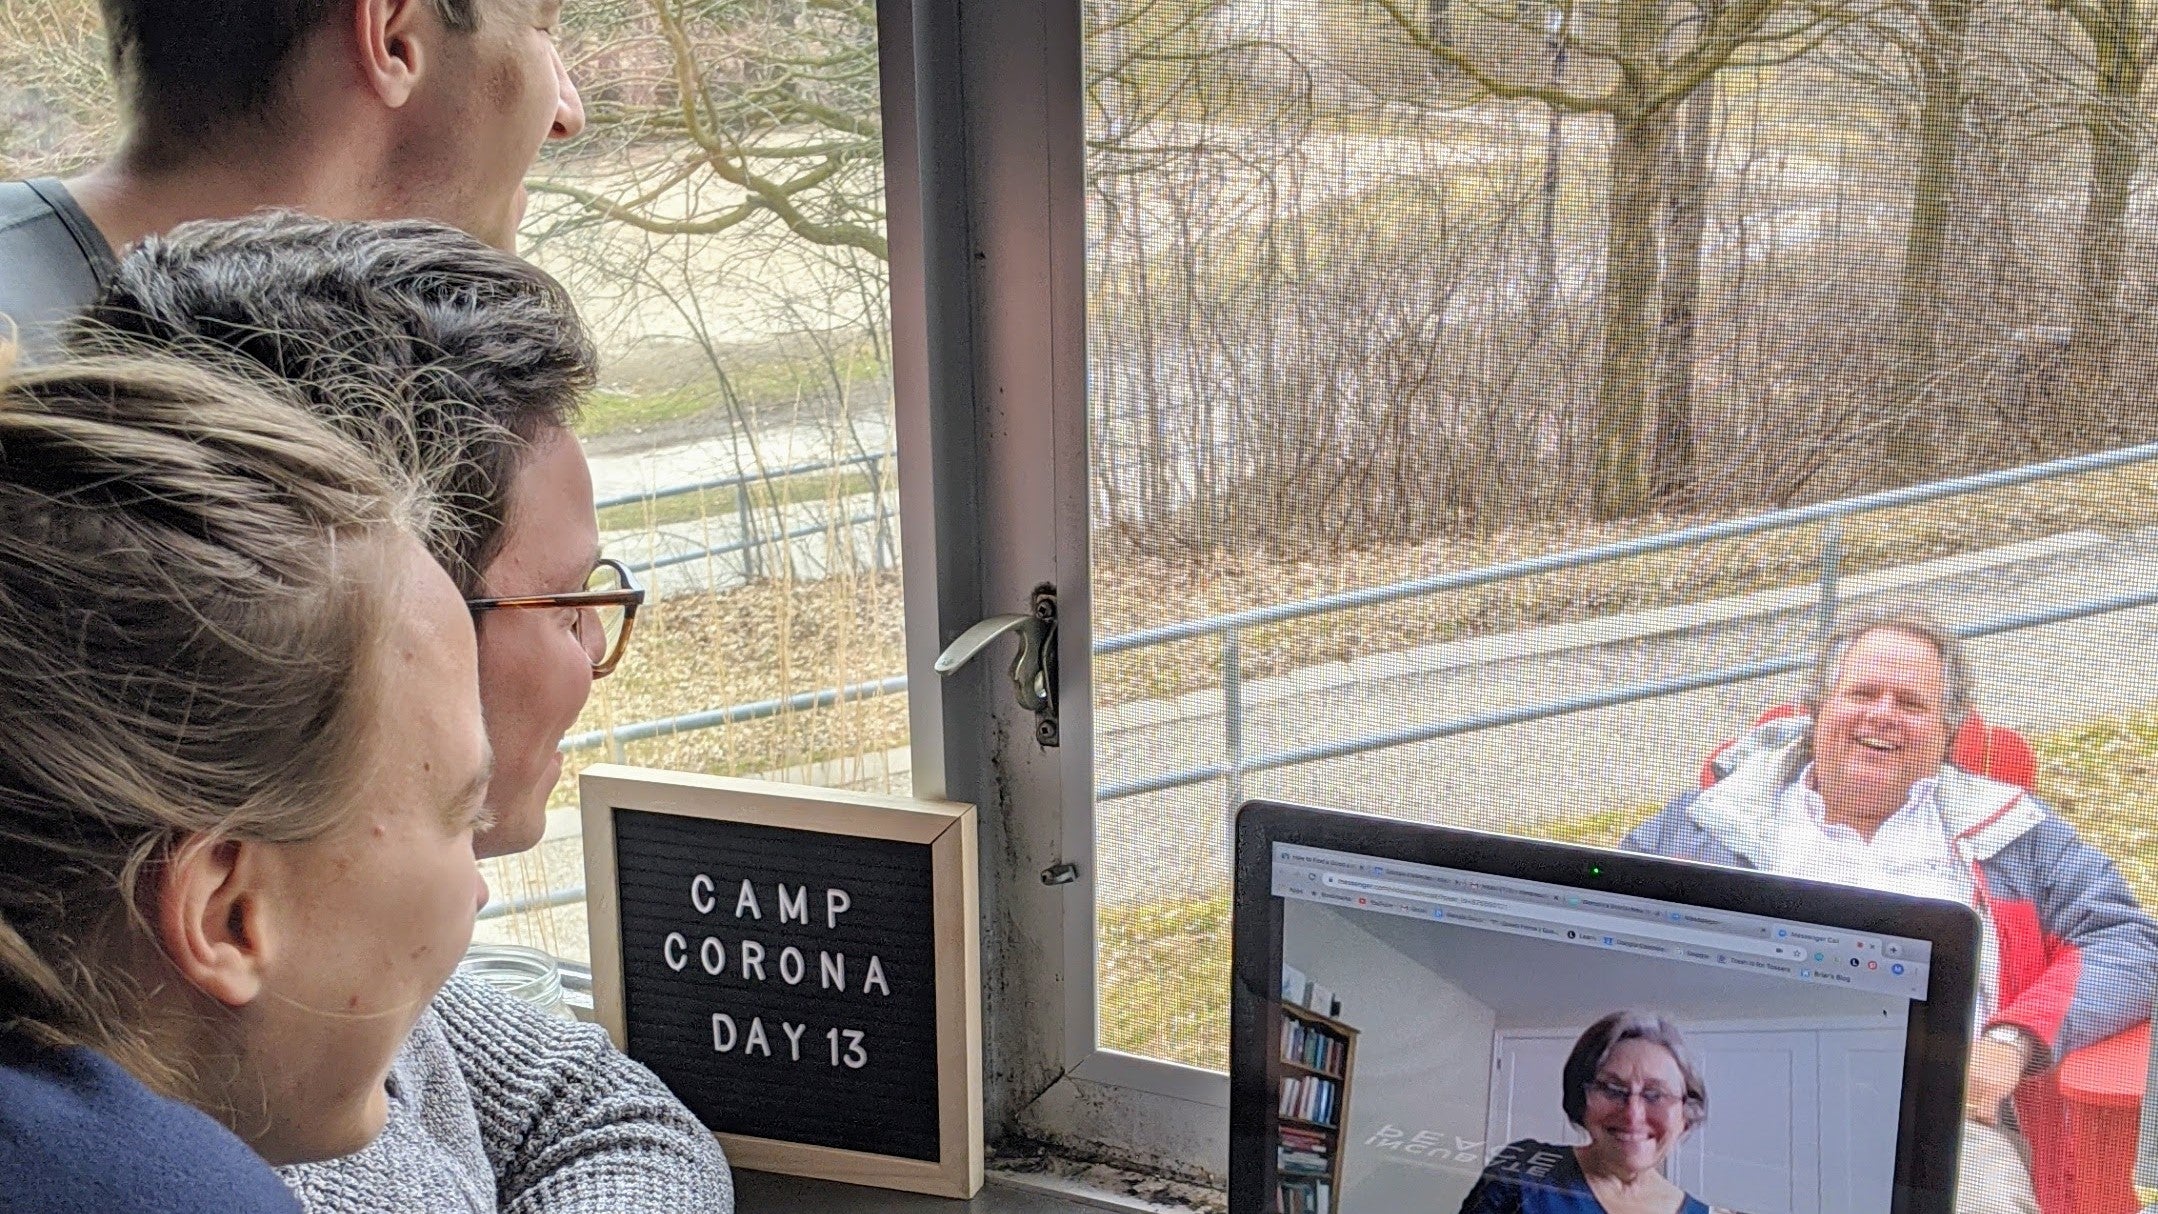 Apartment residents visit with staff through window and video chat